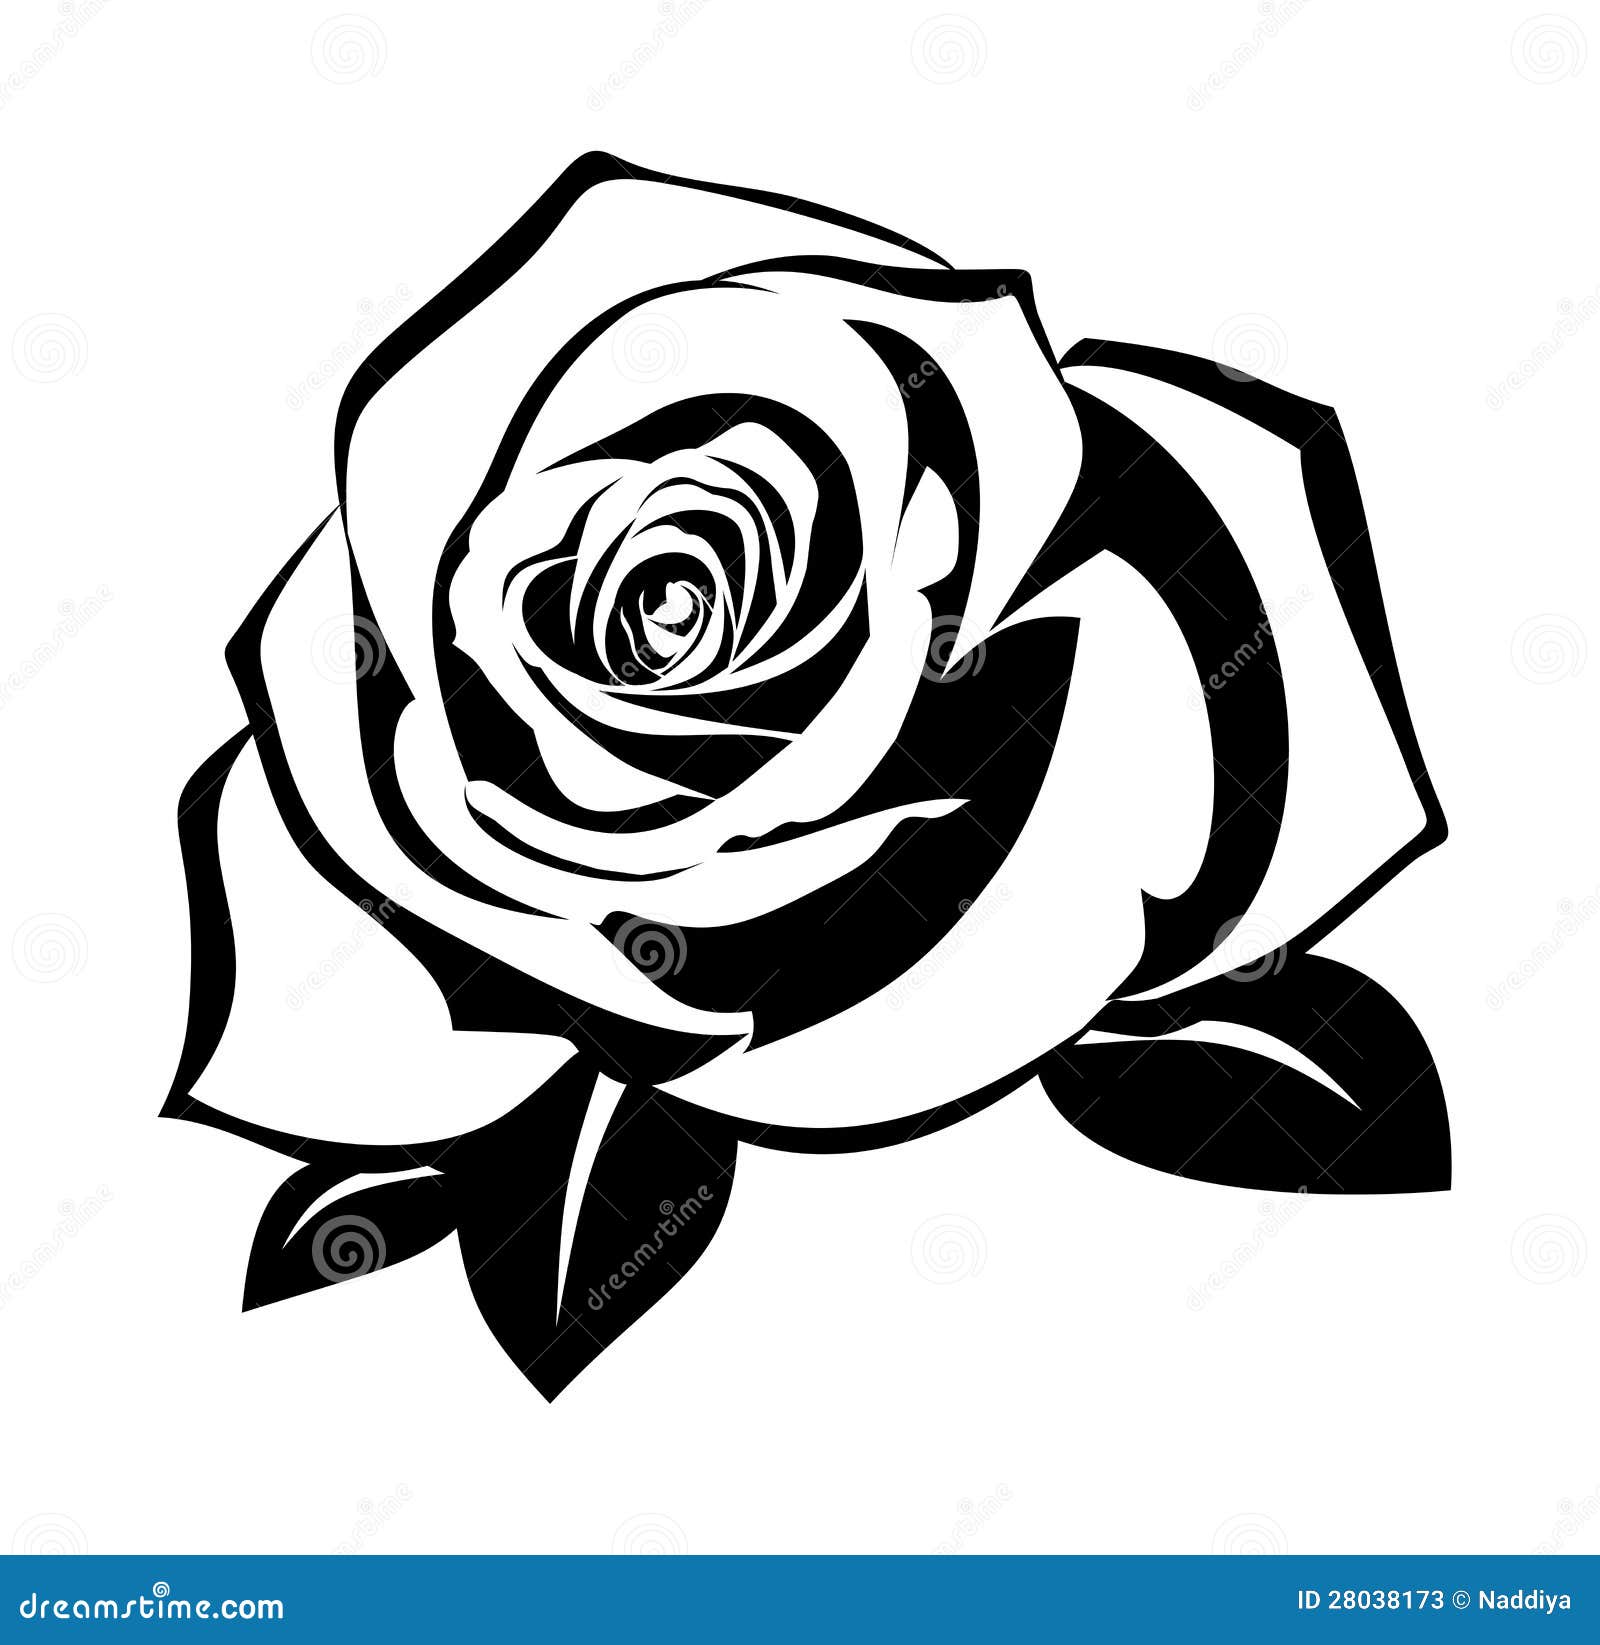 rose clipart silhouette - photo #10